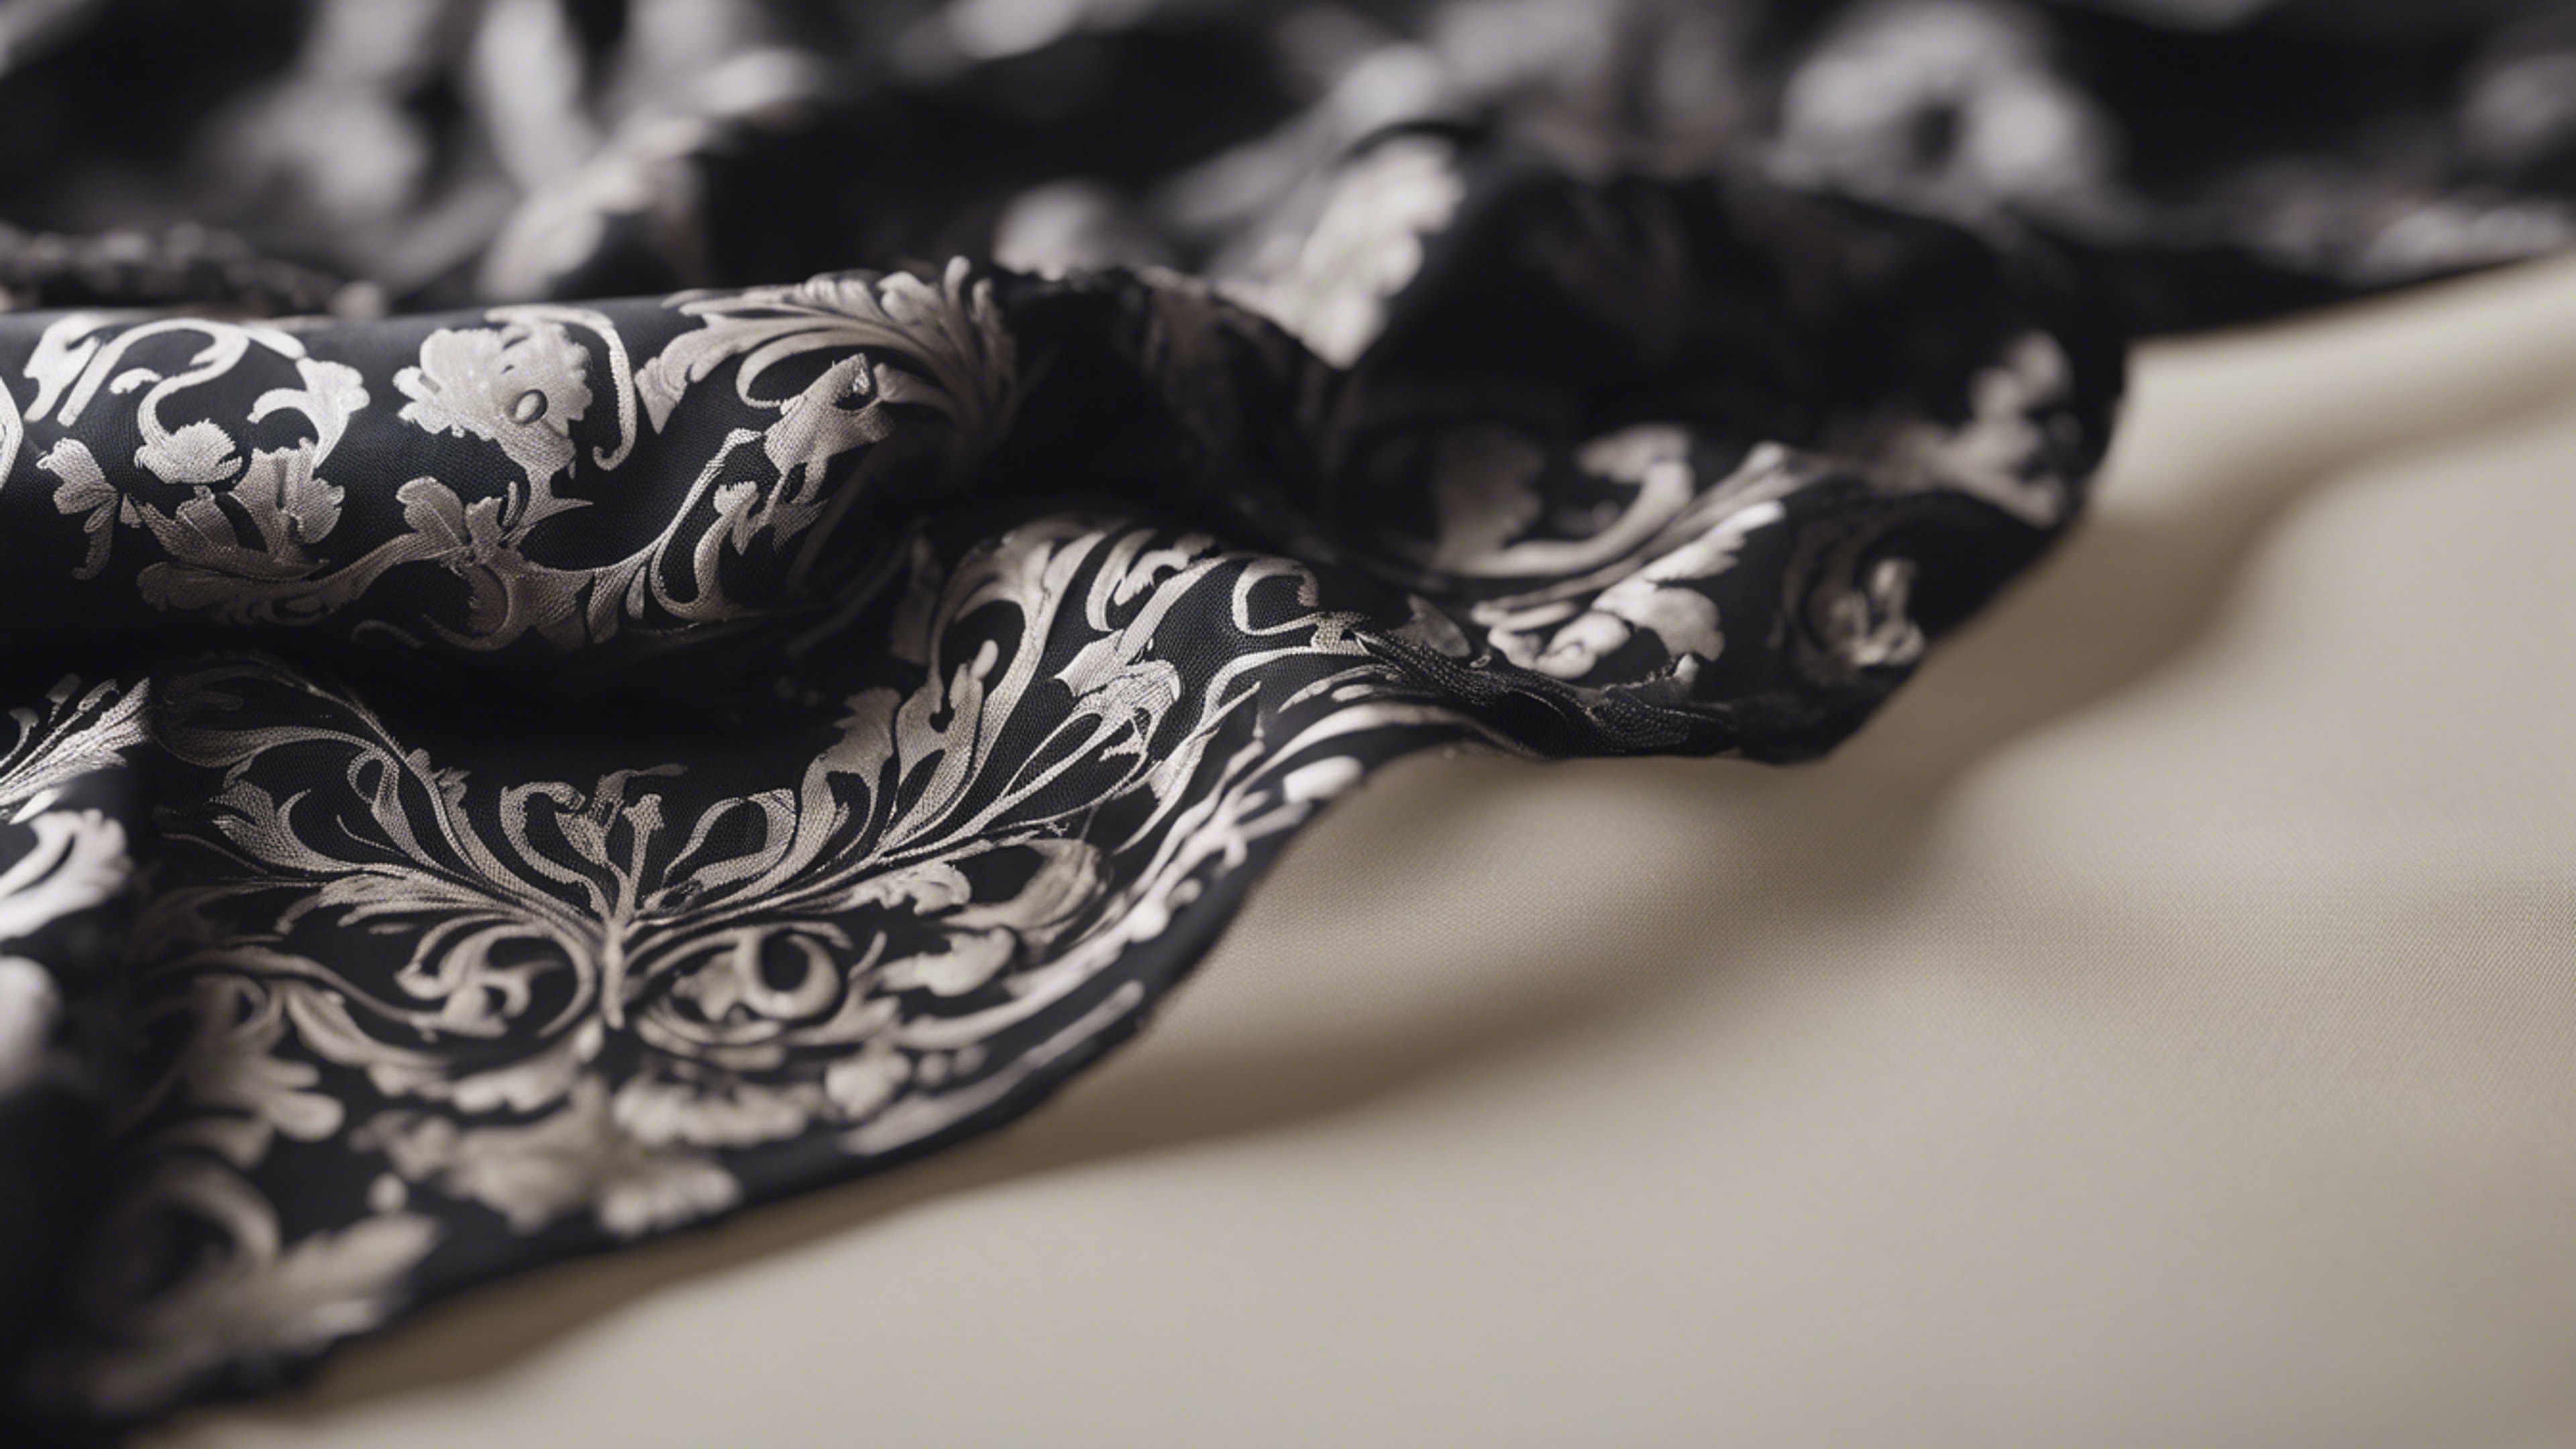 A piece of black damask fabric flowing in the wind on a neutral background. Kertas dinding[14b62583c63644549a6a]